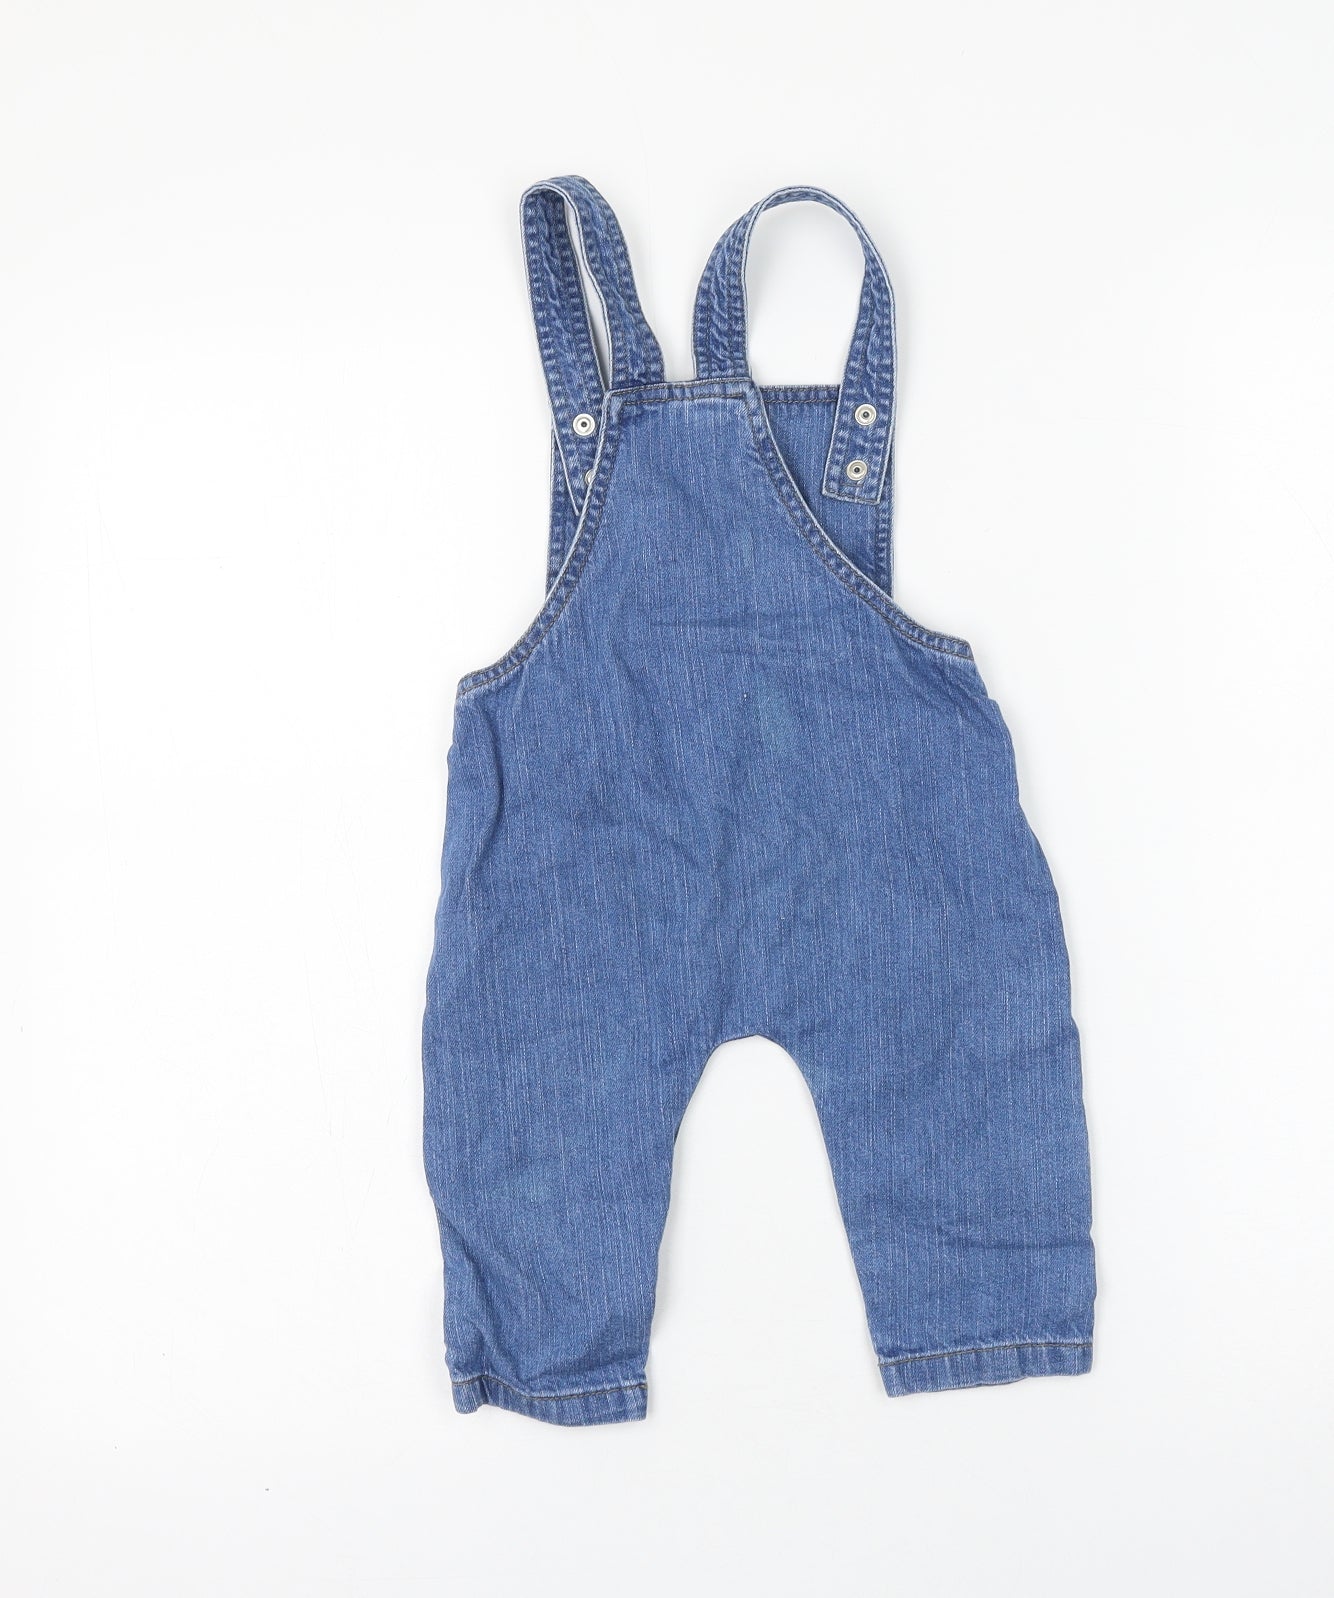 prew Girls Blue Cotton Dungaree One-Piece Size 6-9 Months Button - Size 6-12 Months, Yorkshire Pudding